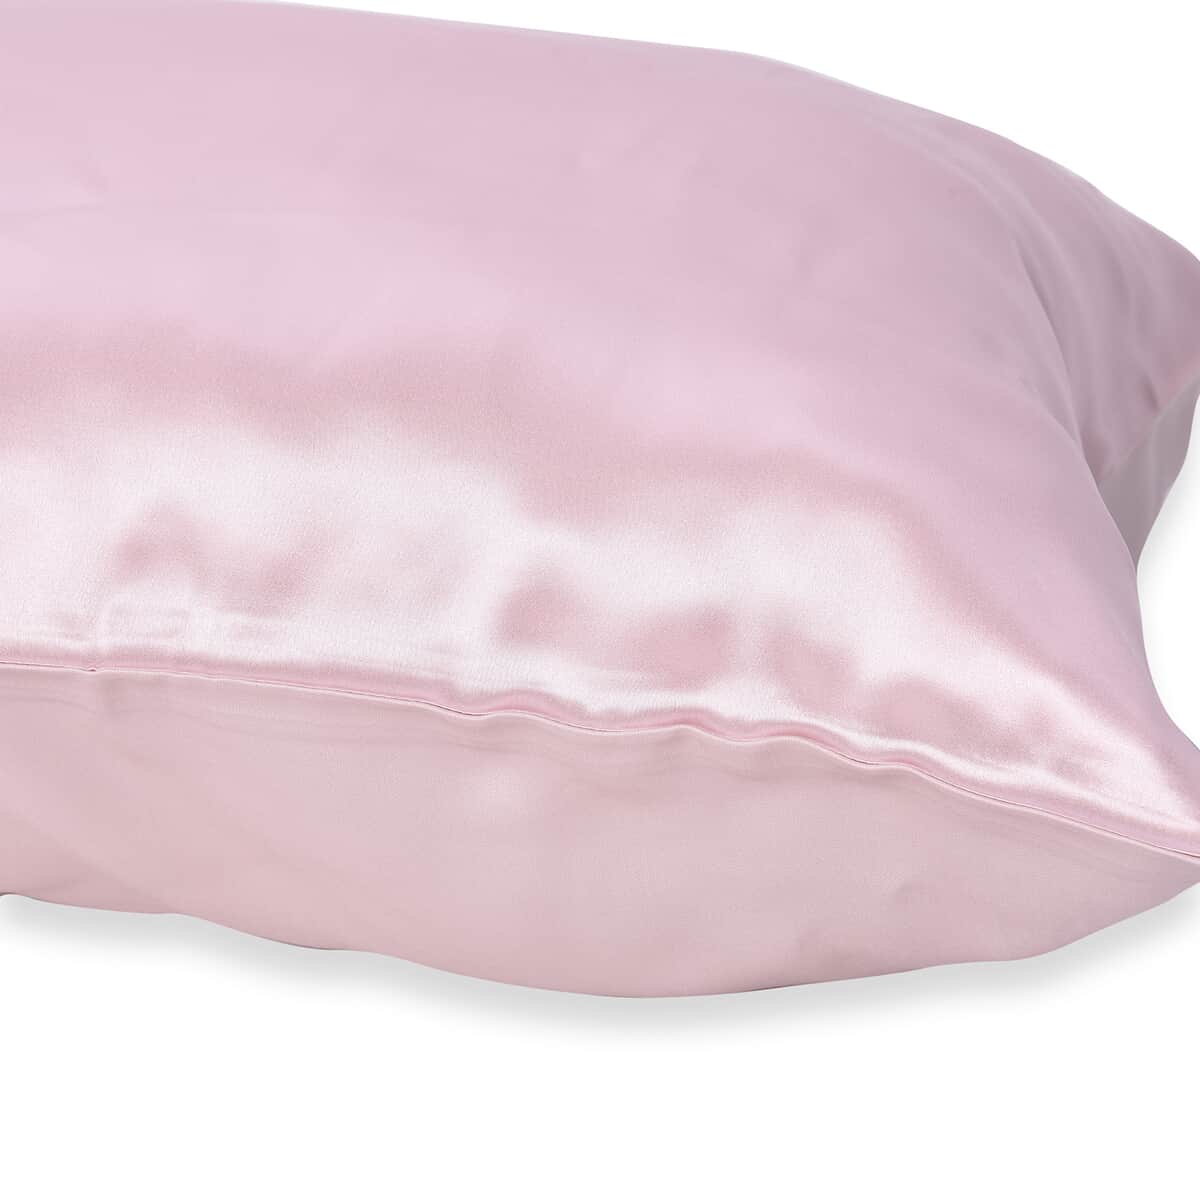 Symphony Home Pink 100% Mulberry Silk Pillowcase Infused with Hyaluronic Acid & Argan Oil - Queen, Pillow Protectors, Pillow Cover, Cushion Cover, Pillow Shams, Pillow Case Covers image number 2